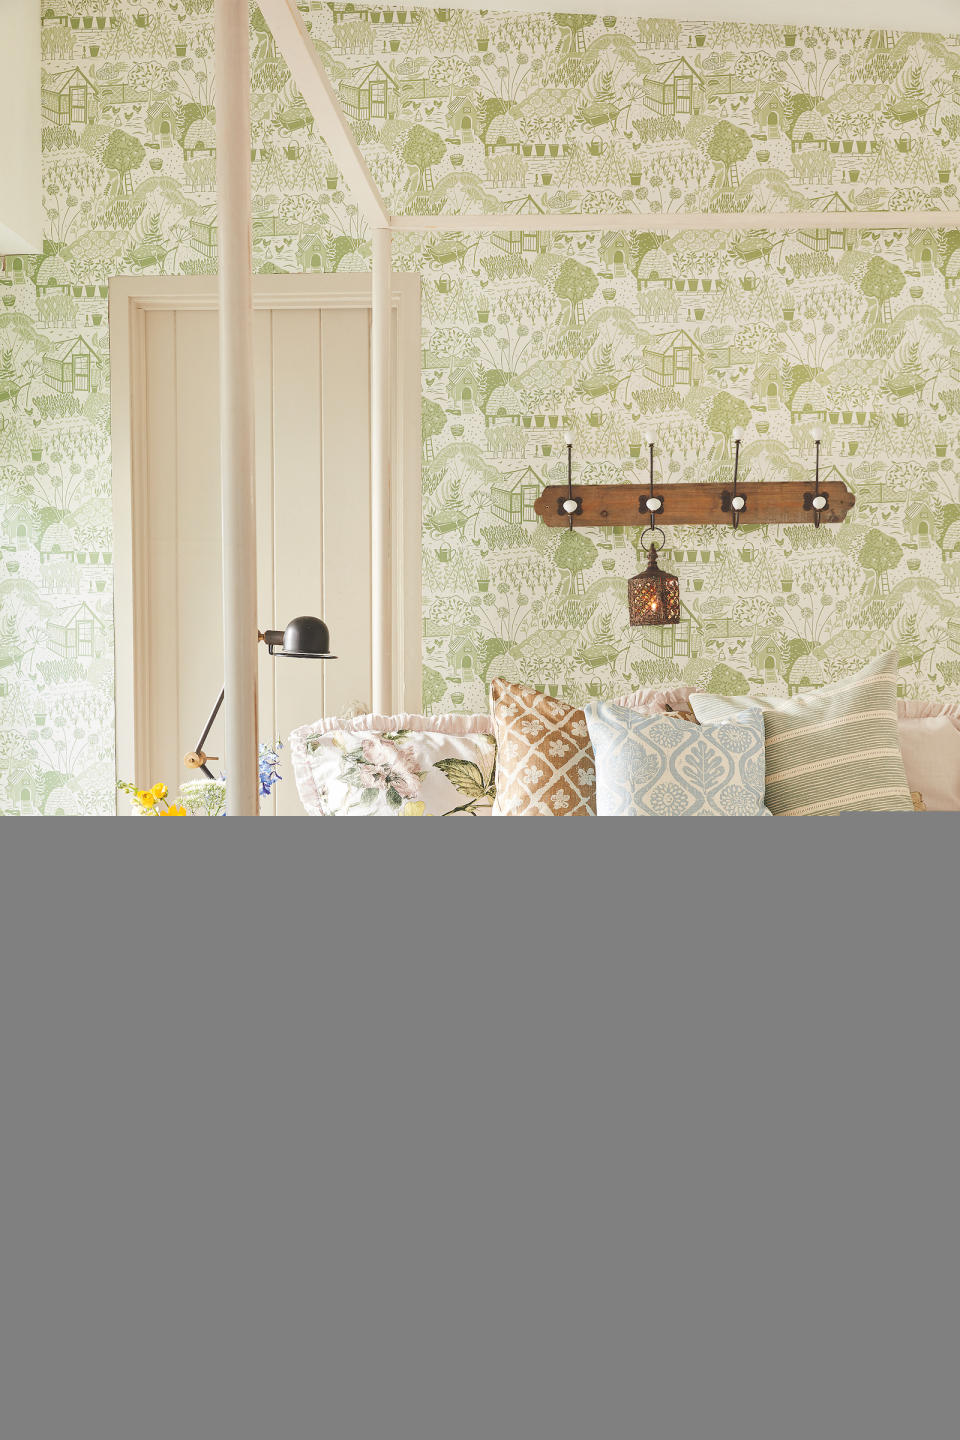 <p> If you're not a fan of florals, there are plenty of other ways to bring a decorate with wallpaper when you're looking for country bedroom ideas. </p> <p> The Allotment wallpaper by Sanderson evokes veggie patches and market gardens, and is a modern country take on traditional toile.  </p> <p> A row of hooks on a rustic board completes the quirky rural look. </p>